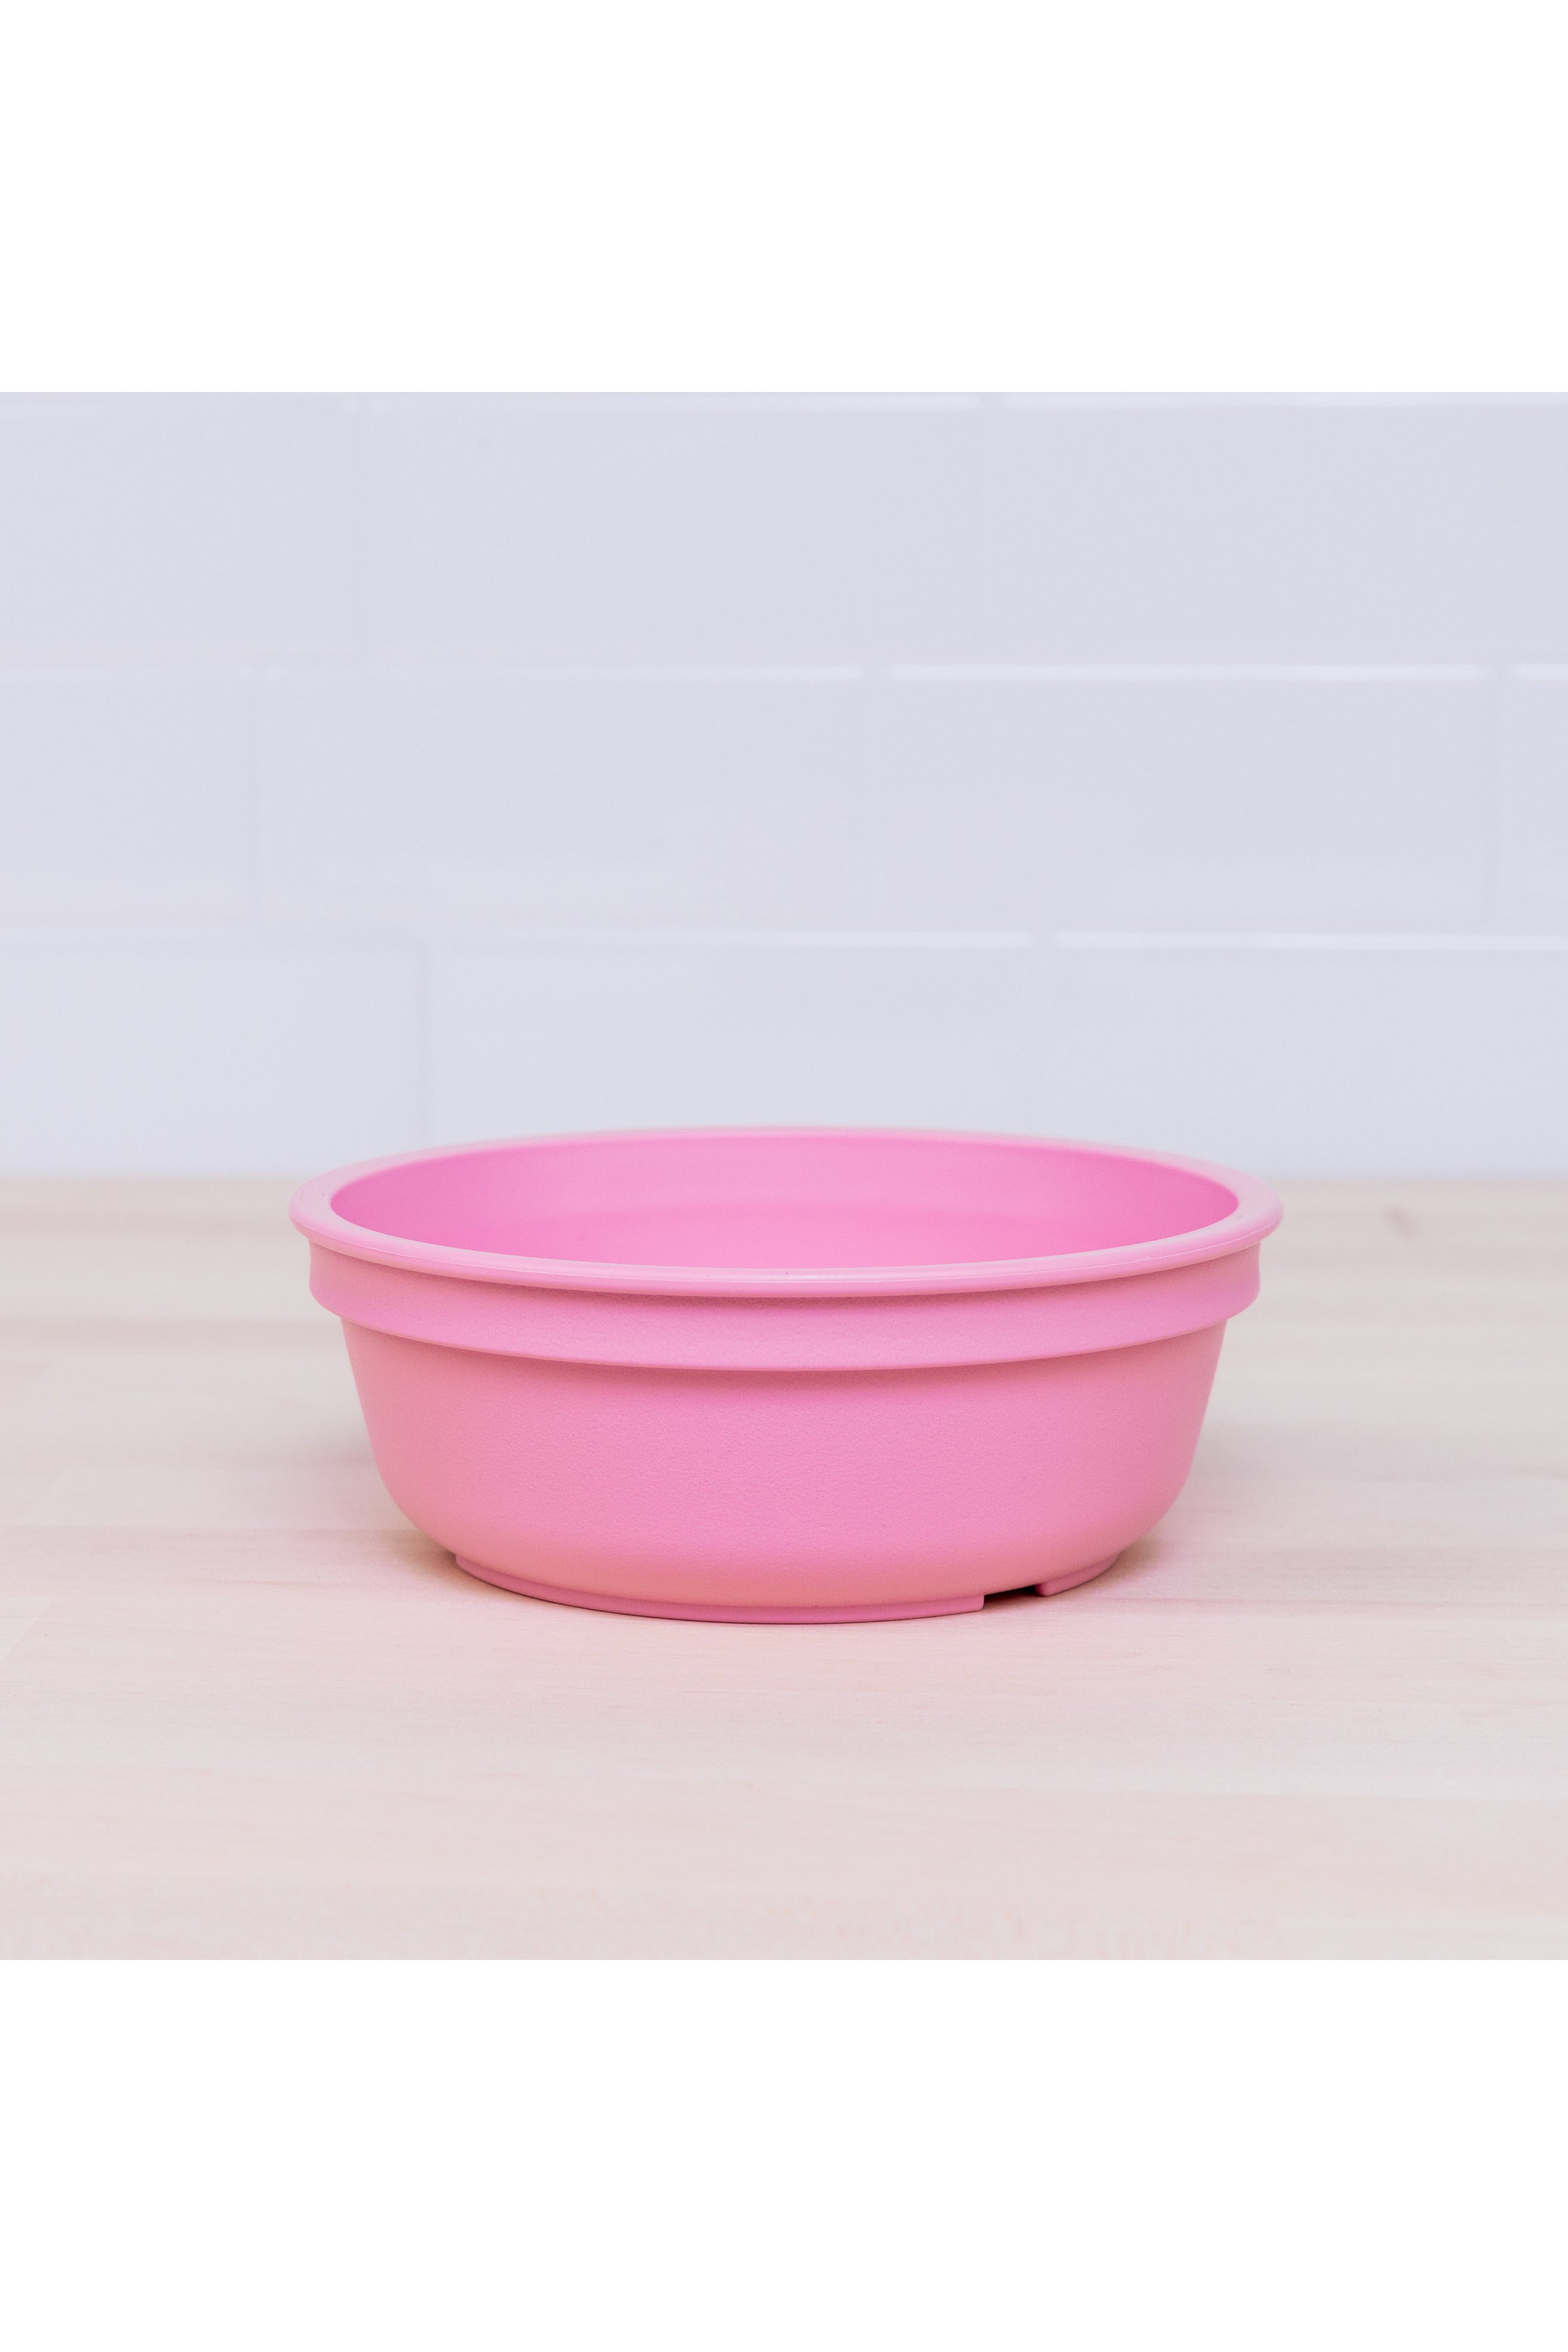 Re-Play Bowl - Baby Pink